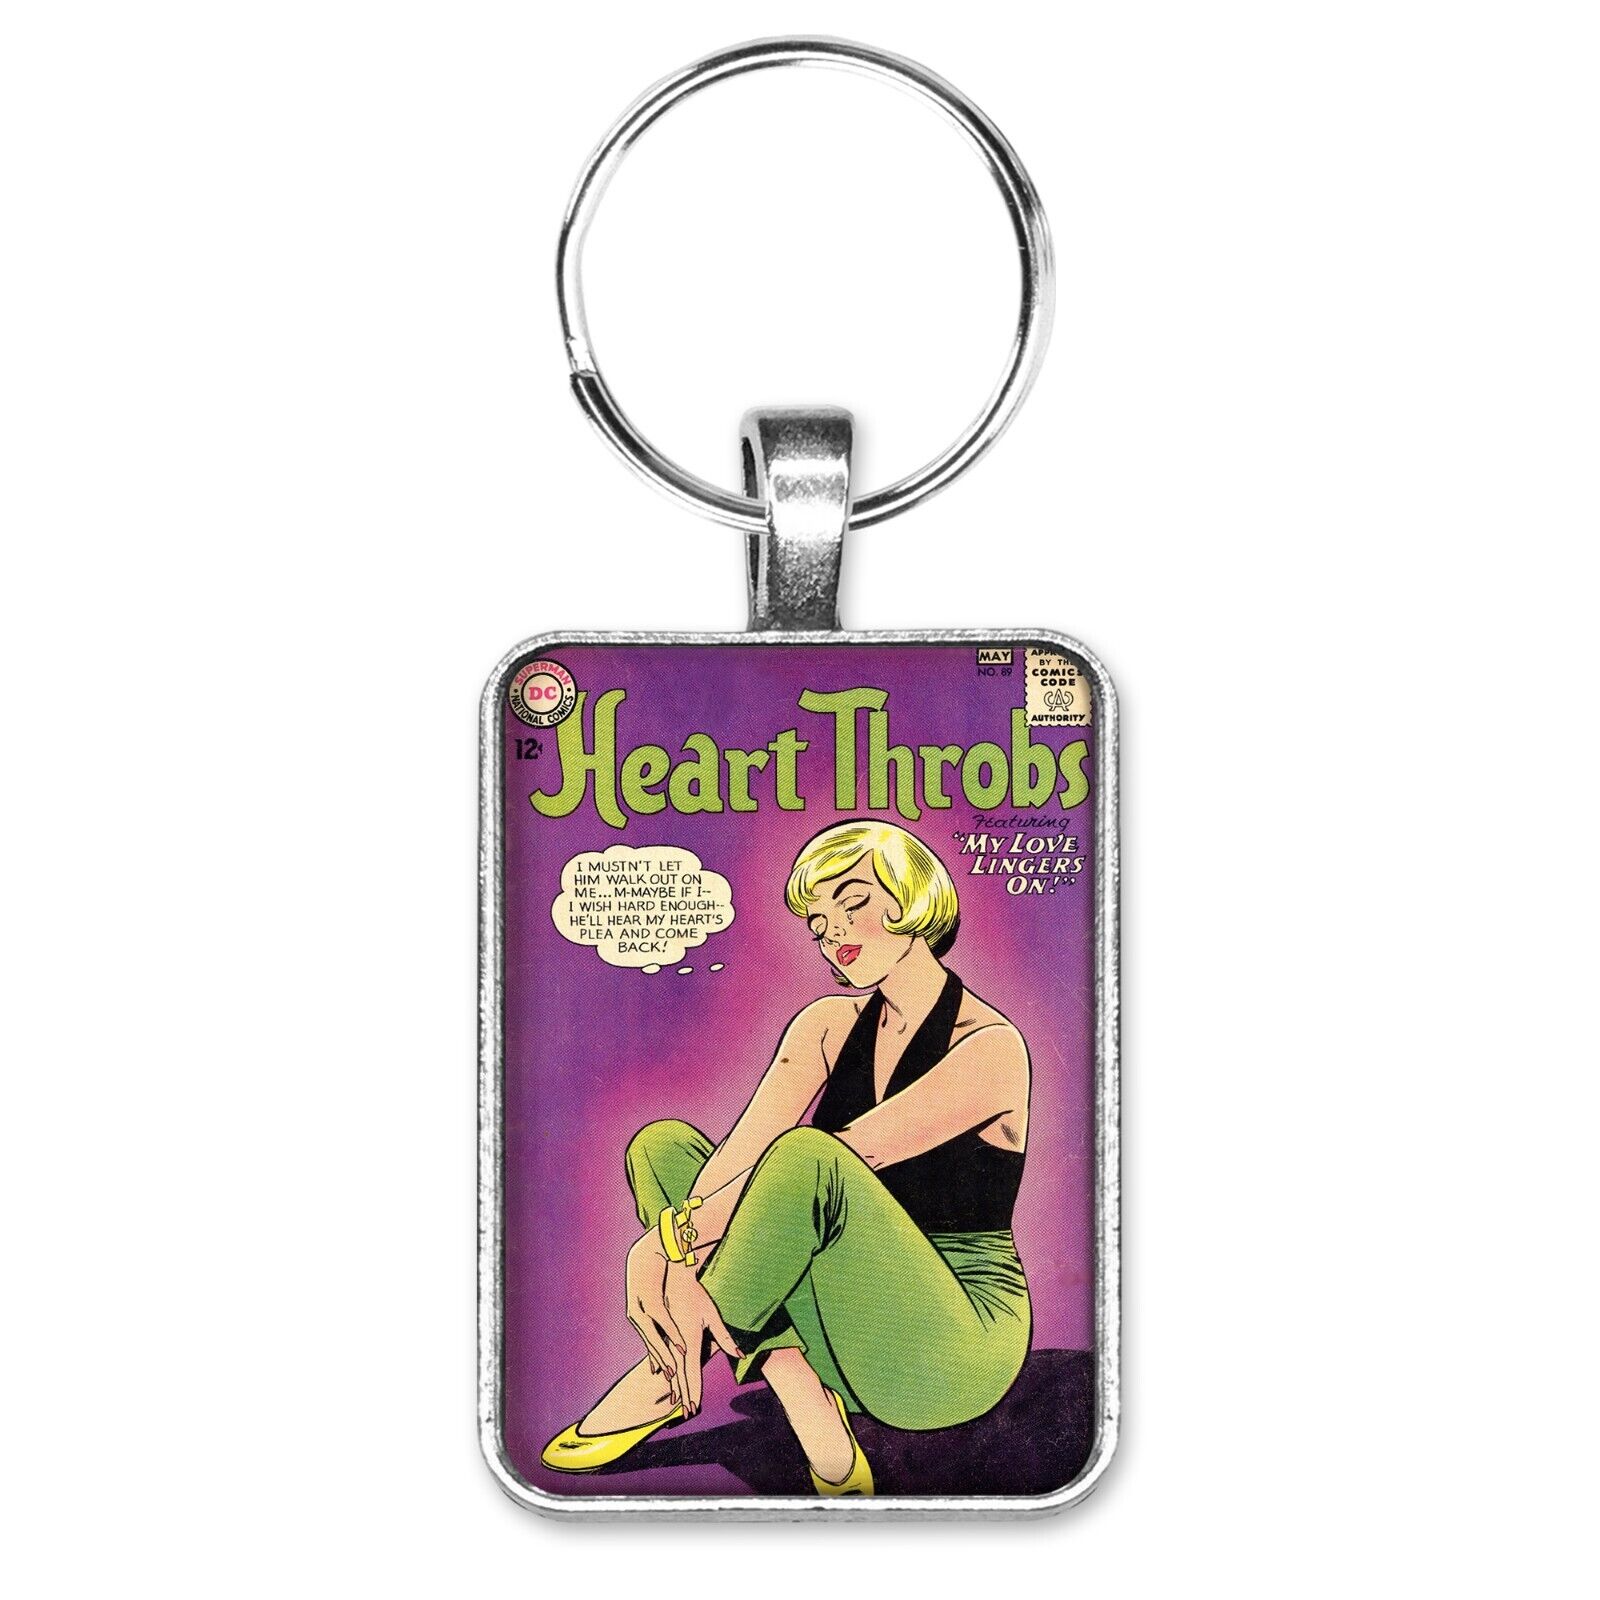 Heart Throbs #89 Cover Key Ring or Necklace Classic Romance Comic Book Jewelry